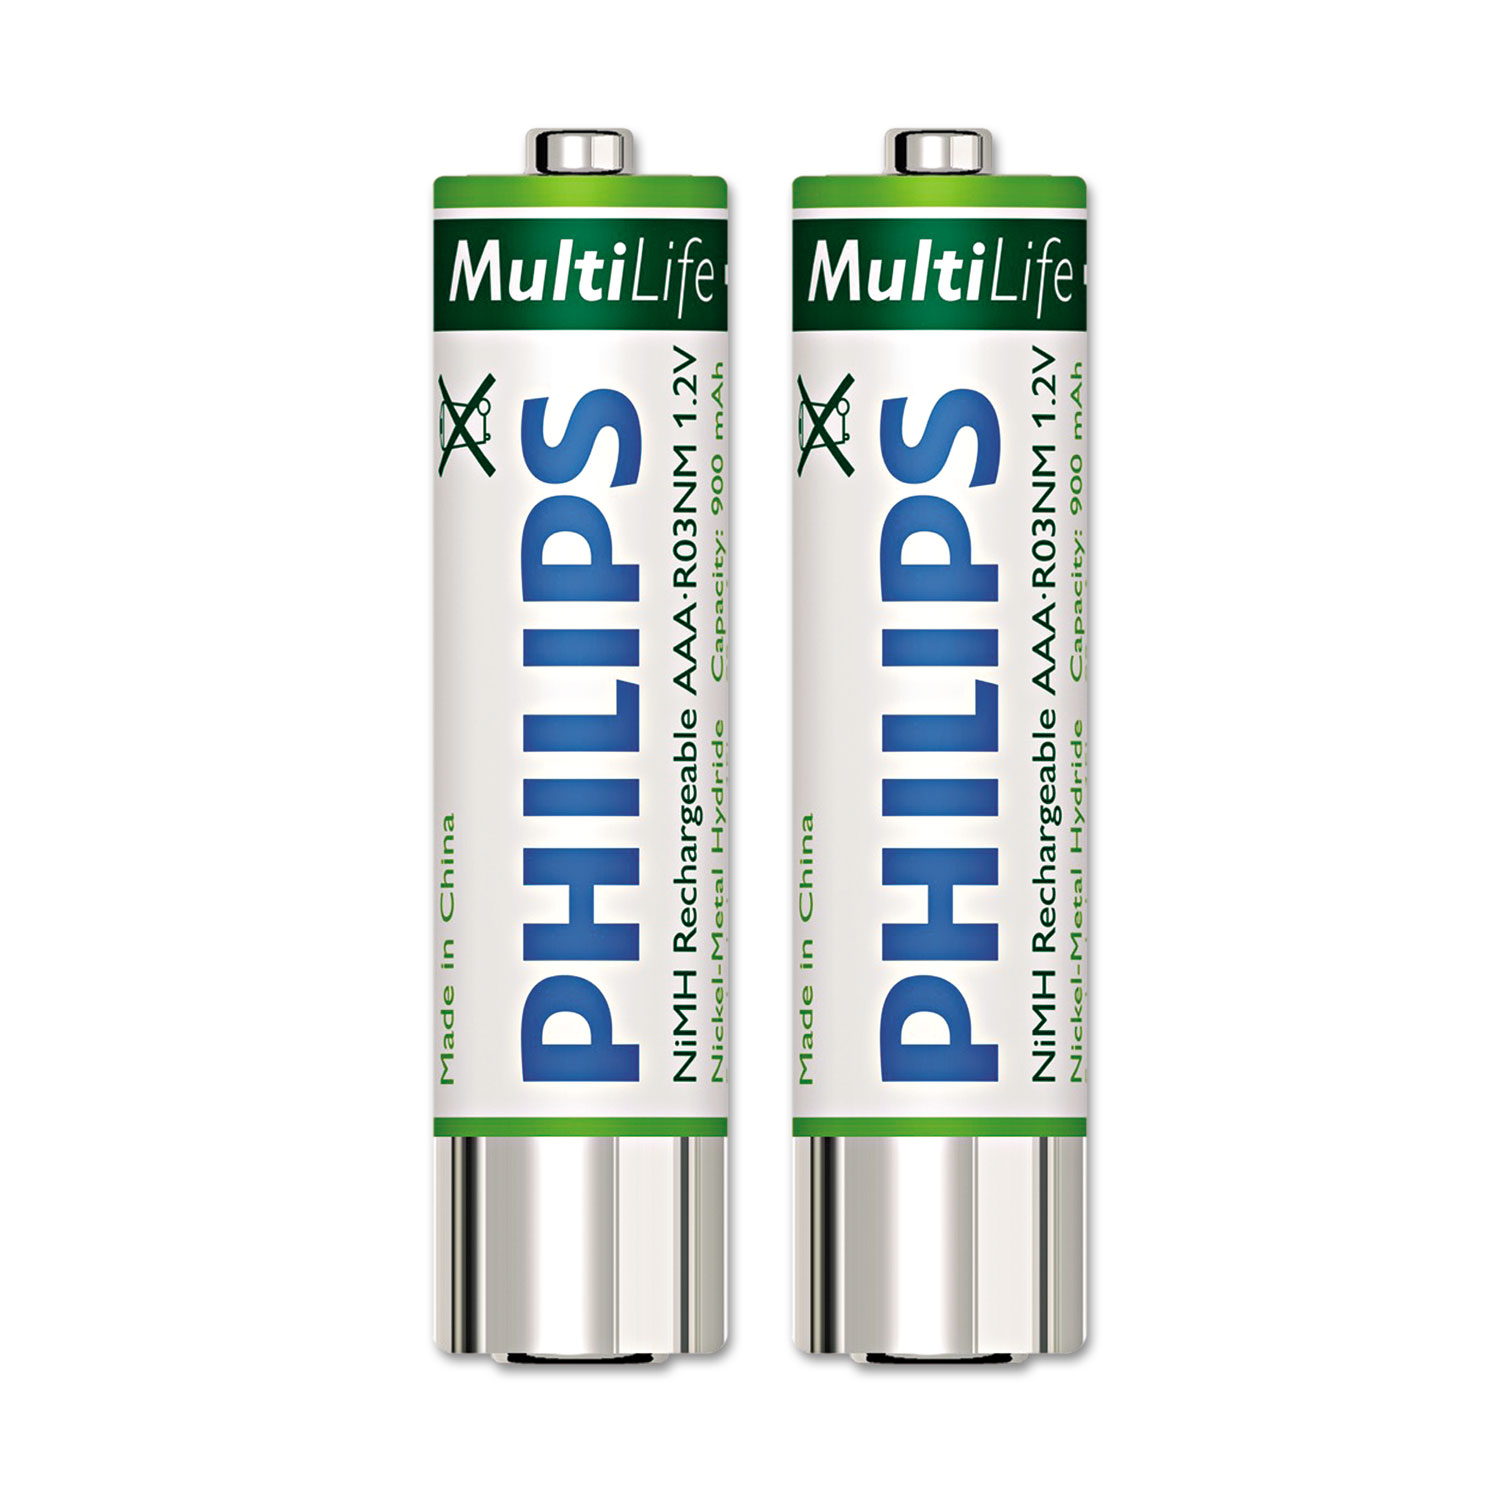  Philips LFH9154/00 Rechargeable NiMH Batteries, AAA, 2 per Pack (PSPLFH915400) 